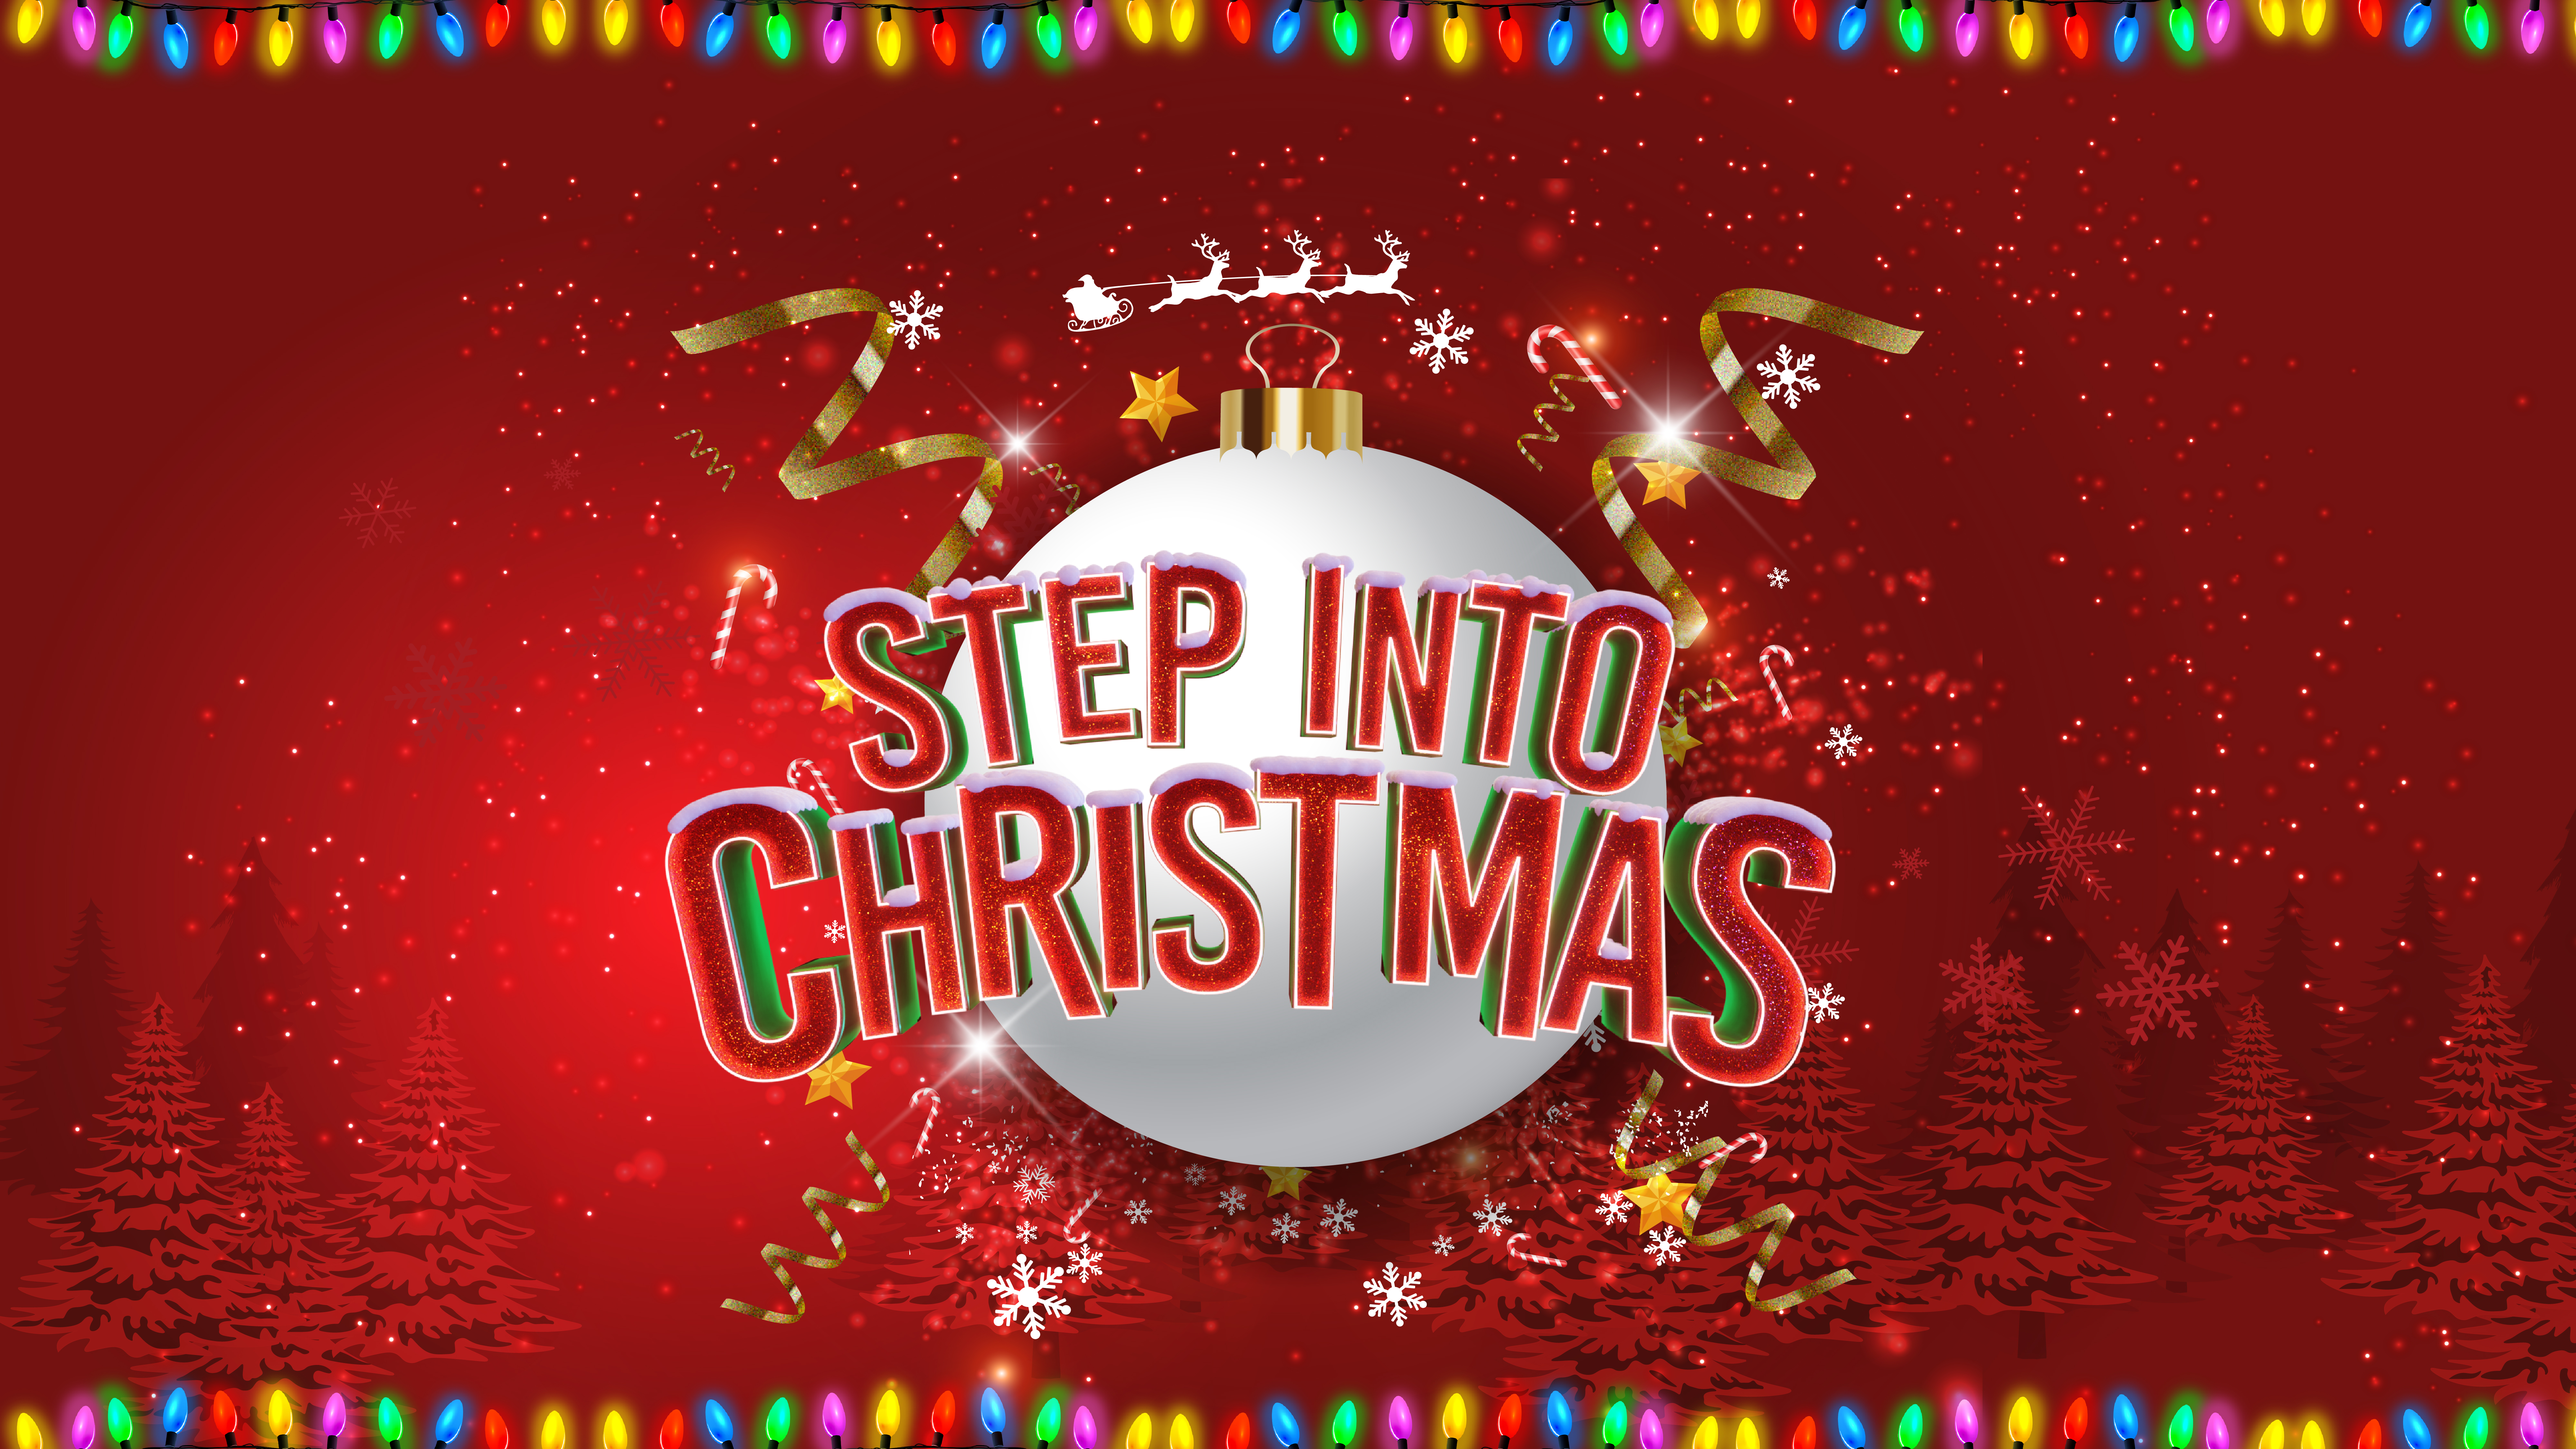 White Christmas Tree bauble with Step Into Christmas written in front of it and other festive decorartions 